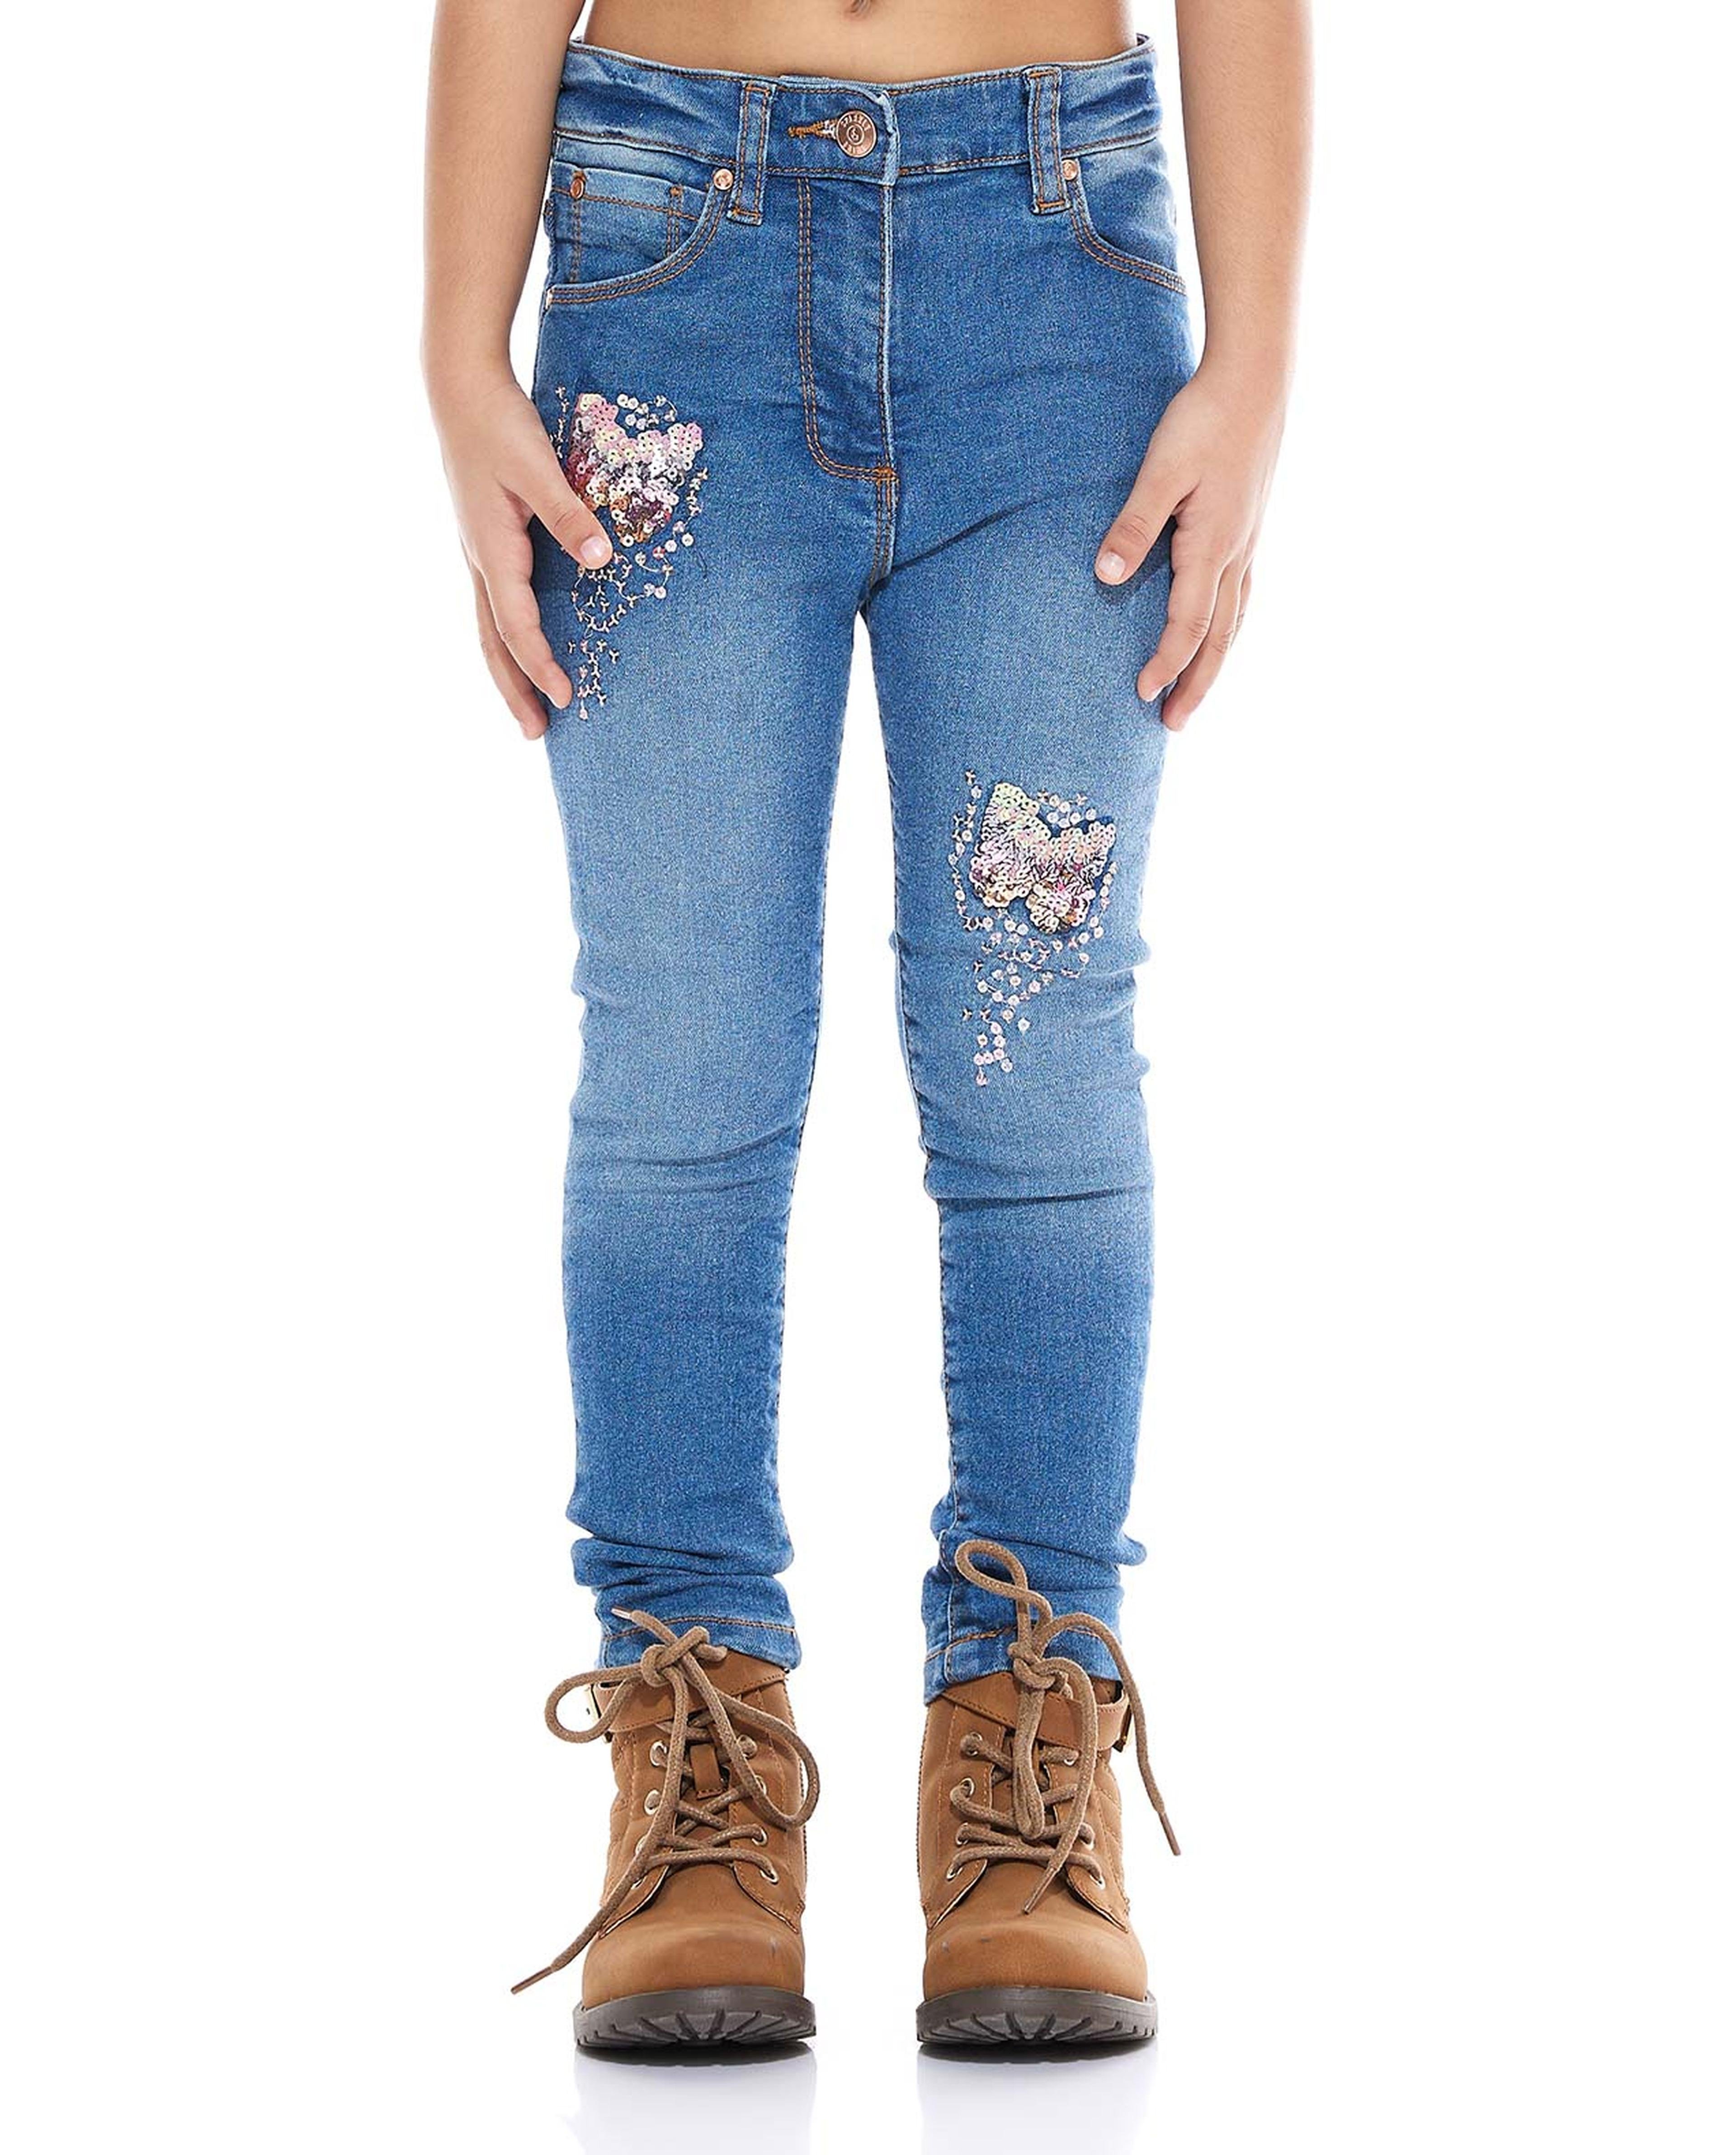 Sequins Skinny Fit Jeans with Button Closure